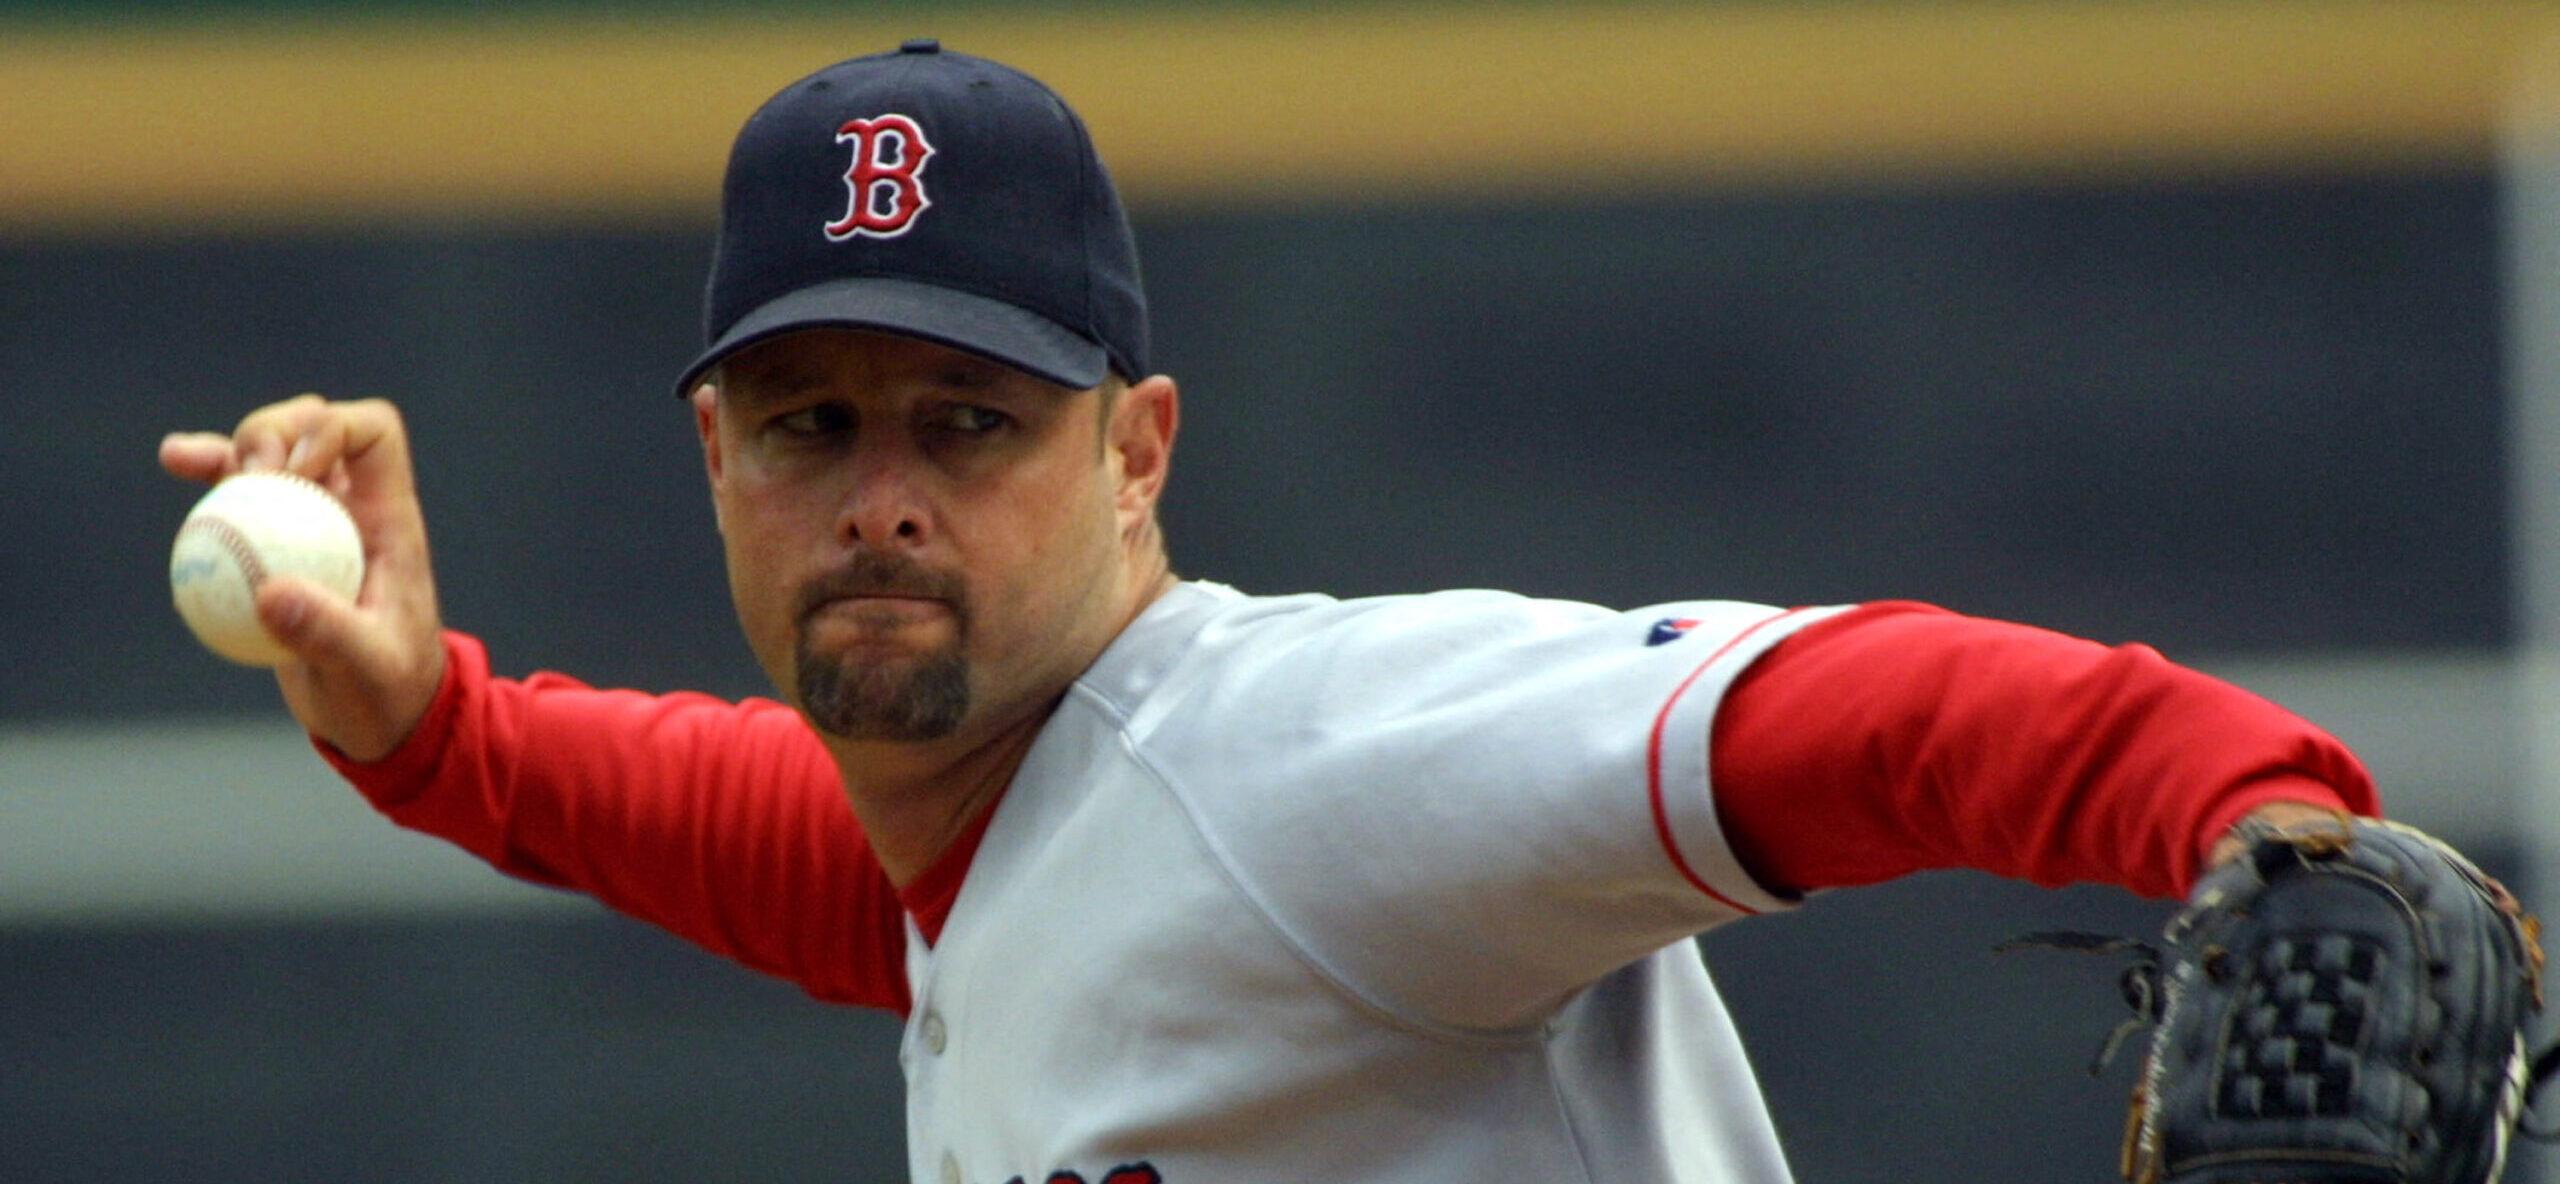 MLB Pitcher Tim Wakefield’s Wife Passes Away Just 4 Months After His Tragic Death